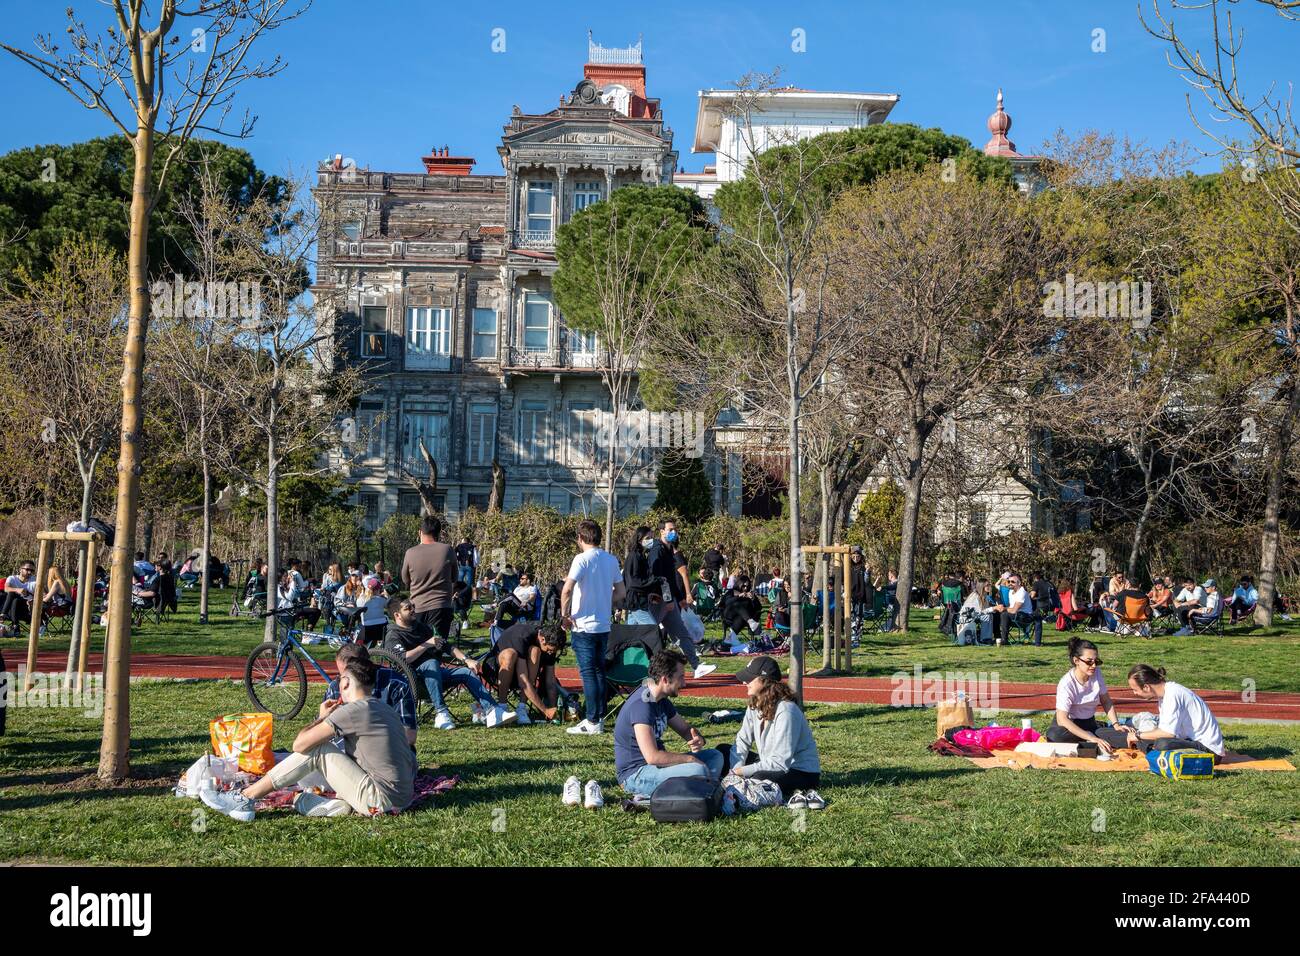 People enjoying beautiful day and sun on Bostanci coasts during pandemic outbreak days before curfew in Kadikoy, Istanbul, Turkey on April 22, 2021. Stock Photo